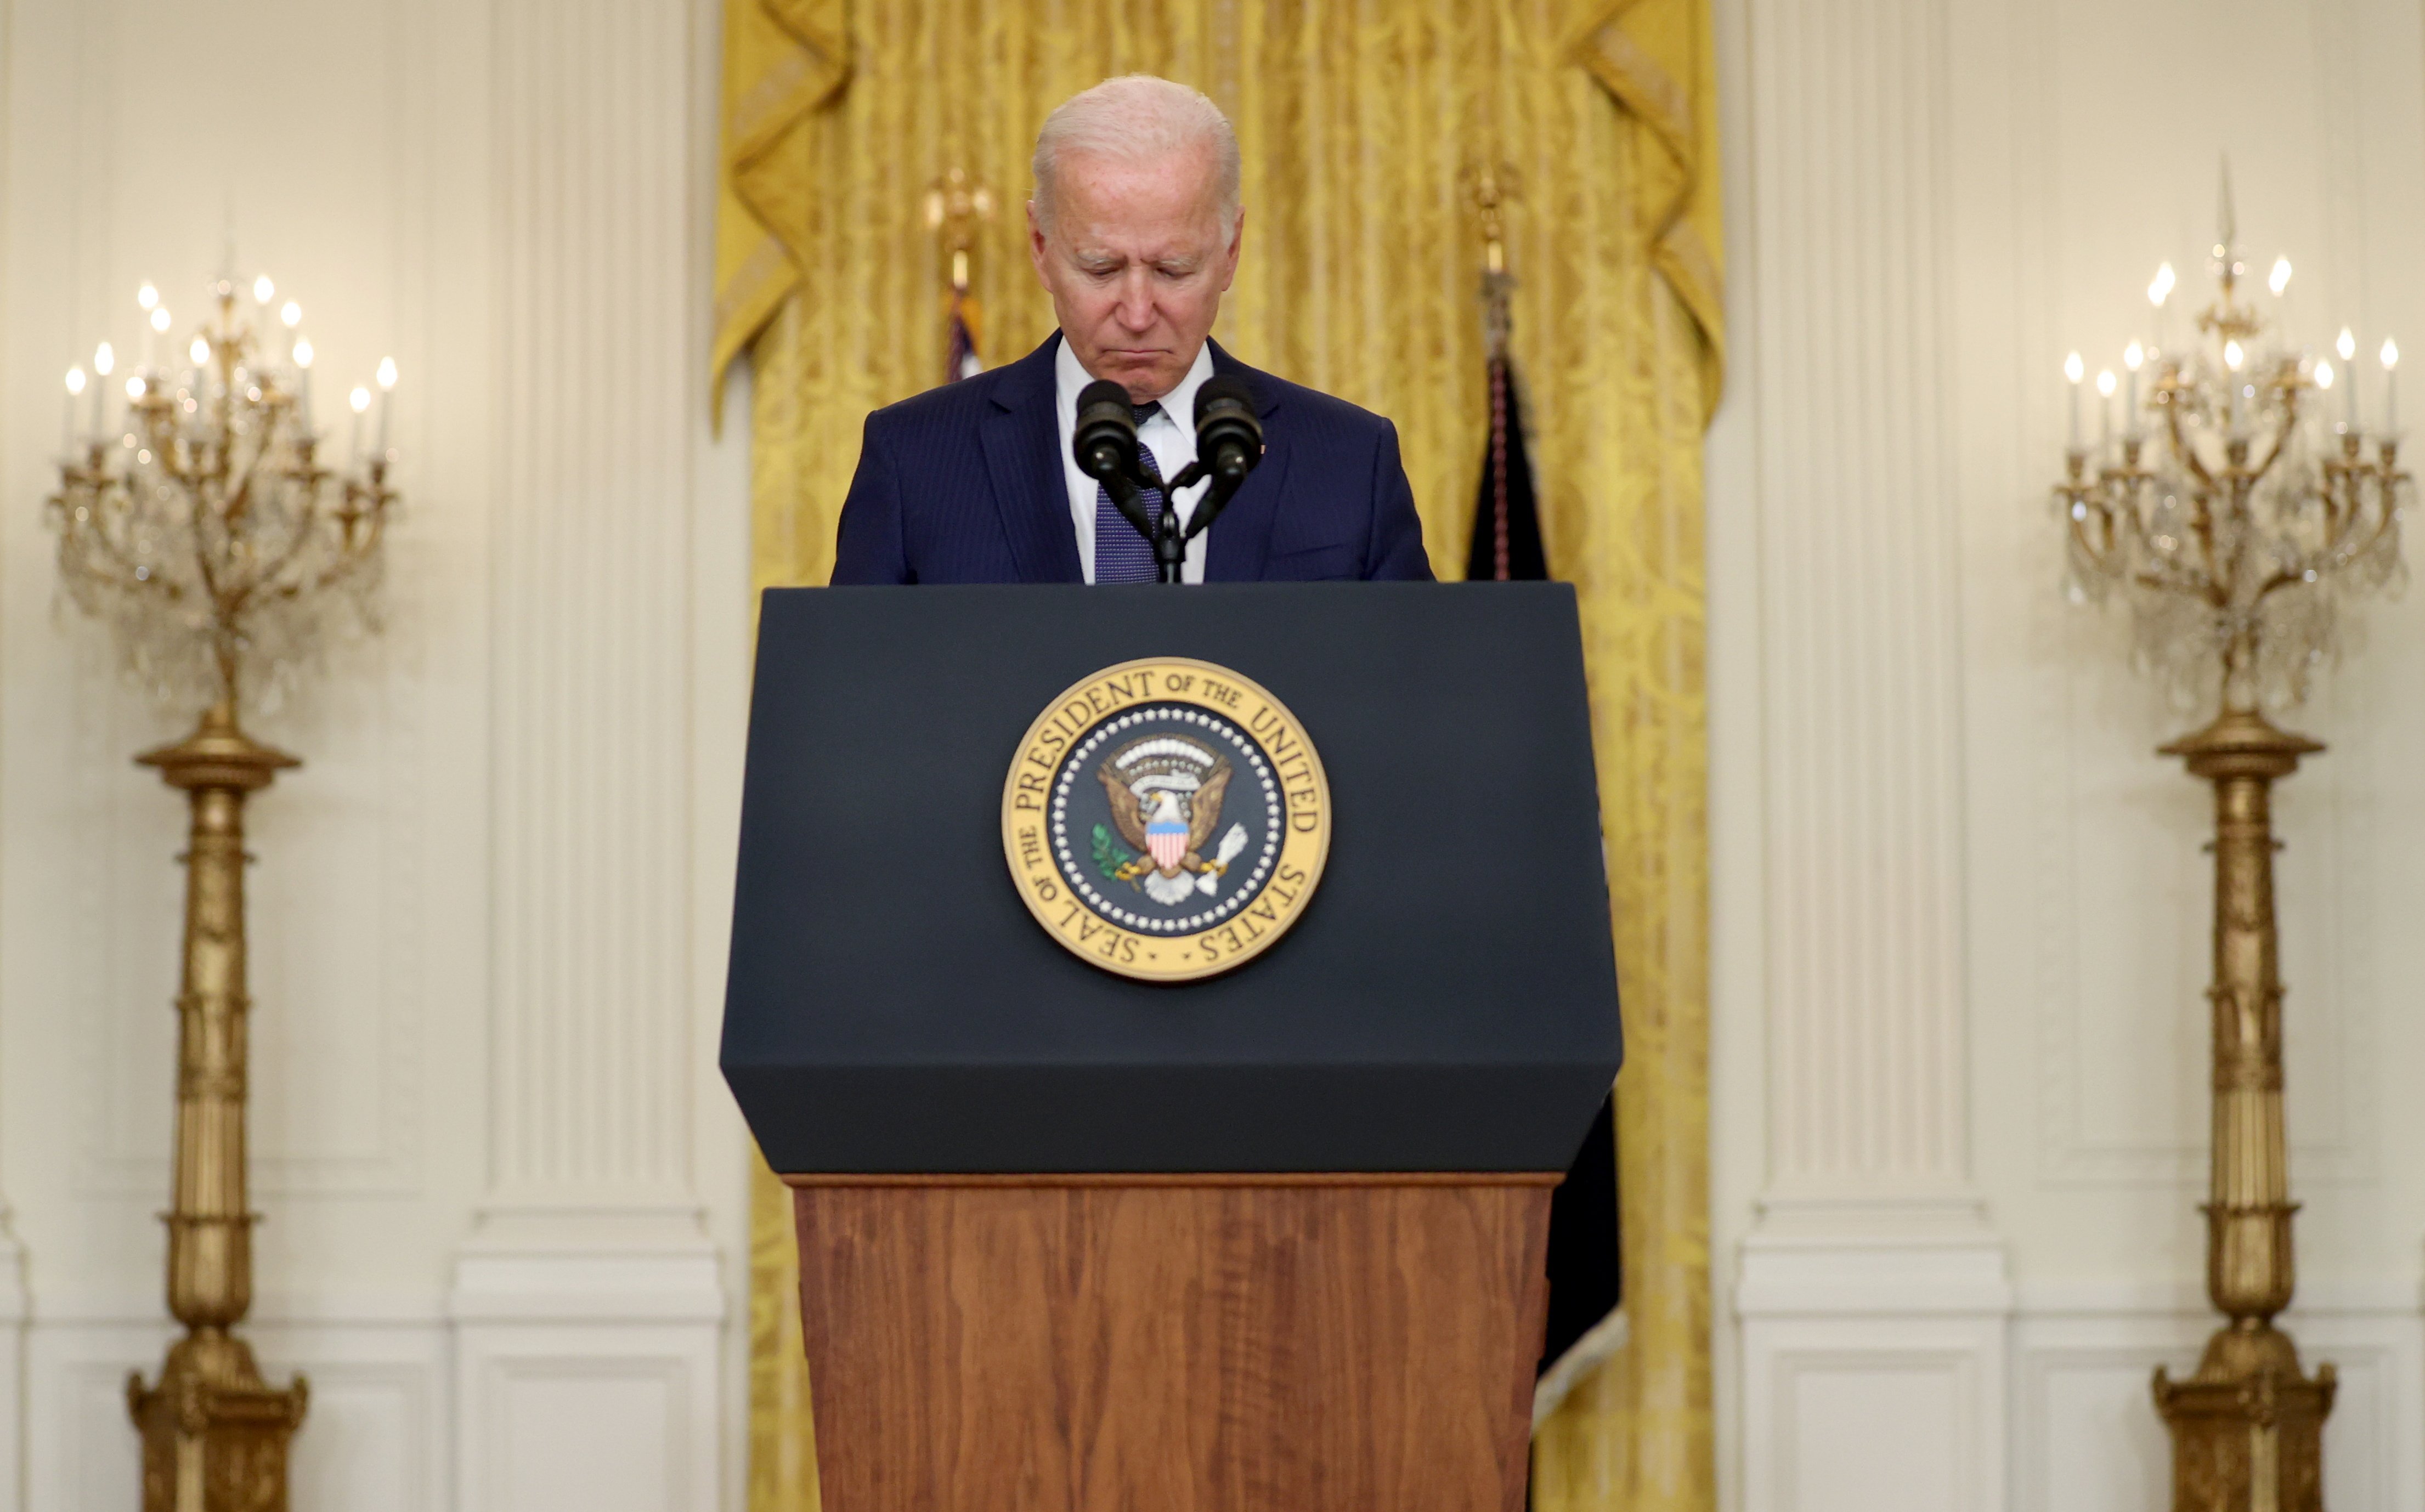 President Joe Biden reacts Aug. 26 during a moment of silence for those who died in twin explosions at the airport in Kabul, Afghanistan, as he delivers remarks about the ongoing chaos in that country at the White House in Washington. (CNS/Reuters/Jonatha